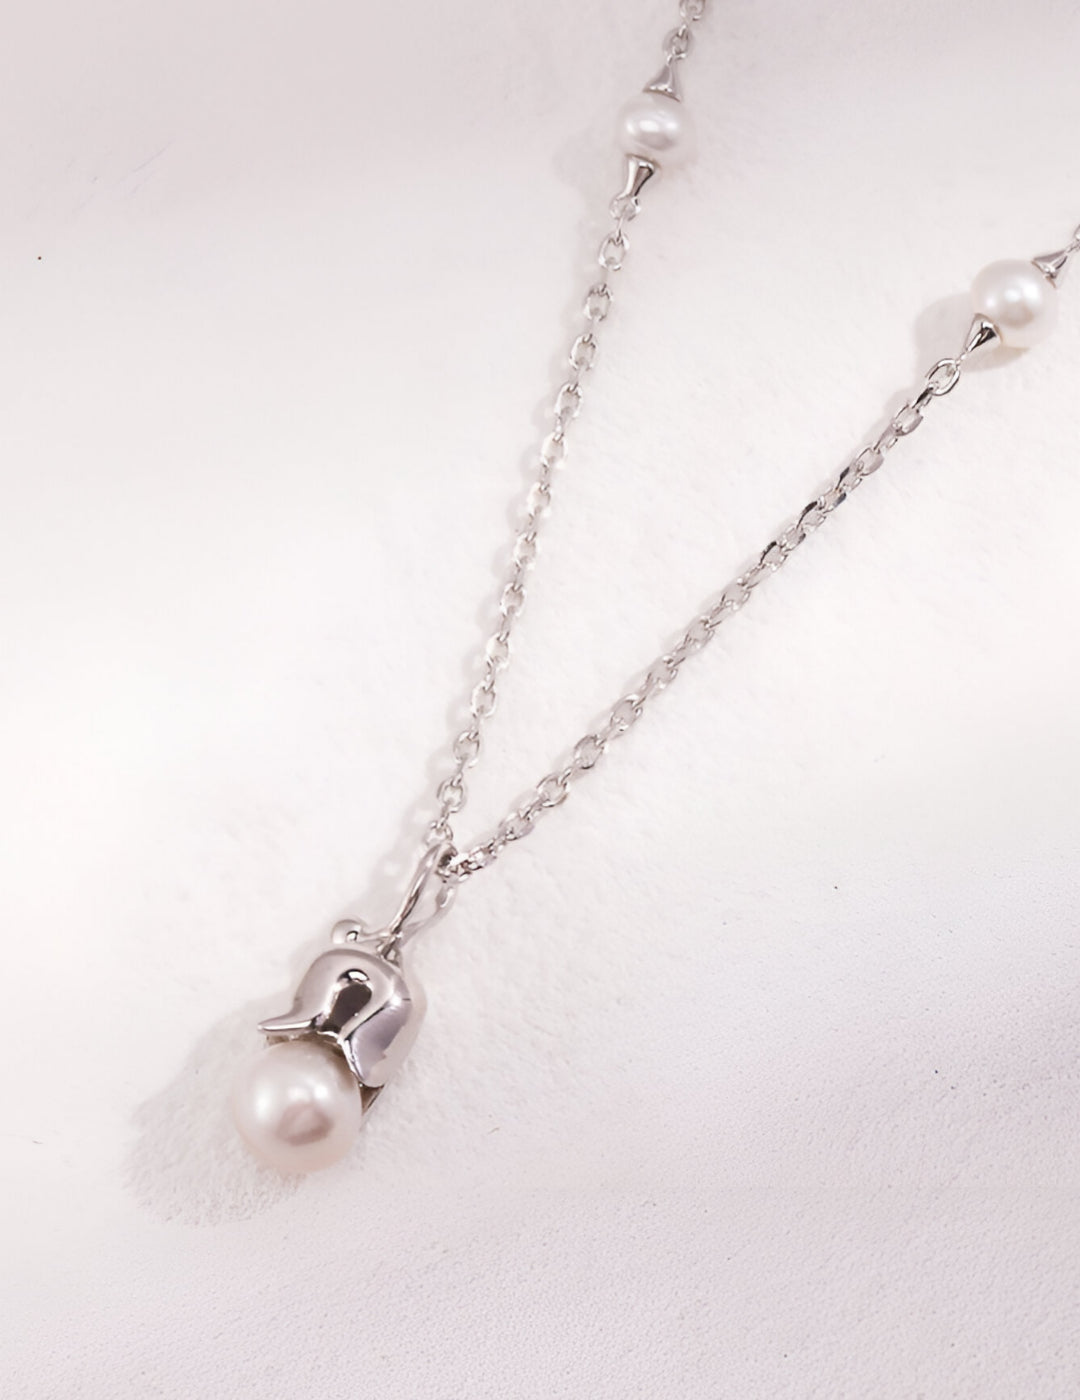 Necklace with Delicate beauty of a tulip bud - Grace with a pearl  - S925 Sterling Silver with 18K Gold Vermeil - Pearl Luminance - a gorgeous accessory that adds a touch of elegance to any look - Handcrafted with love - this necklace is perfect for every occasion